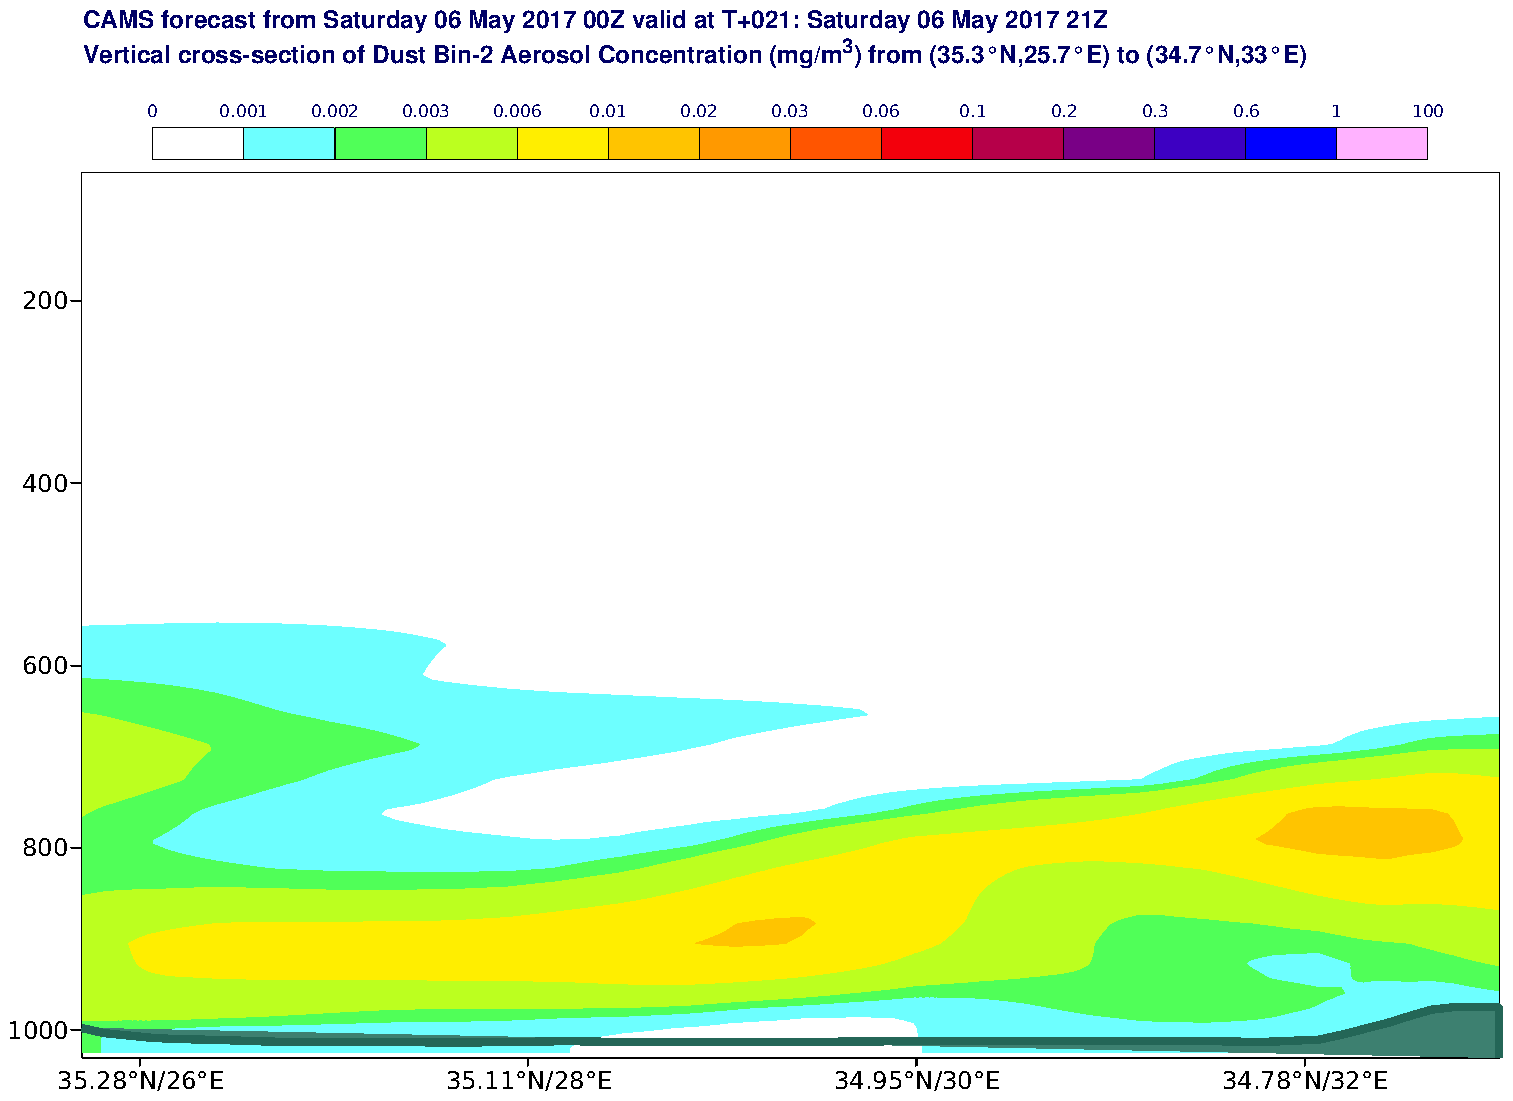 Vertical cross-section of Dust Bin-2 Aerosol Concentration (mg/m3) valid at T21 - 2017-05-06 21:00